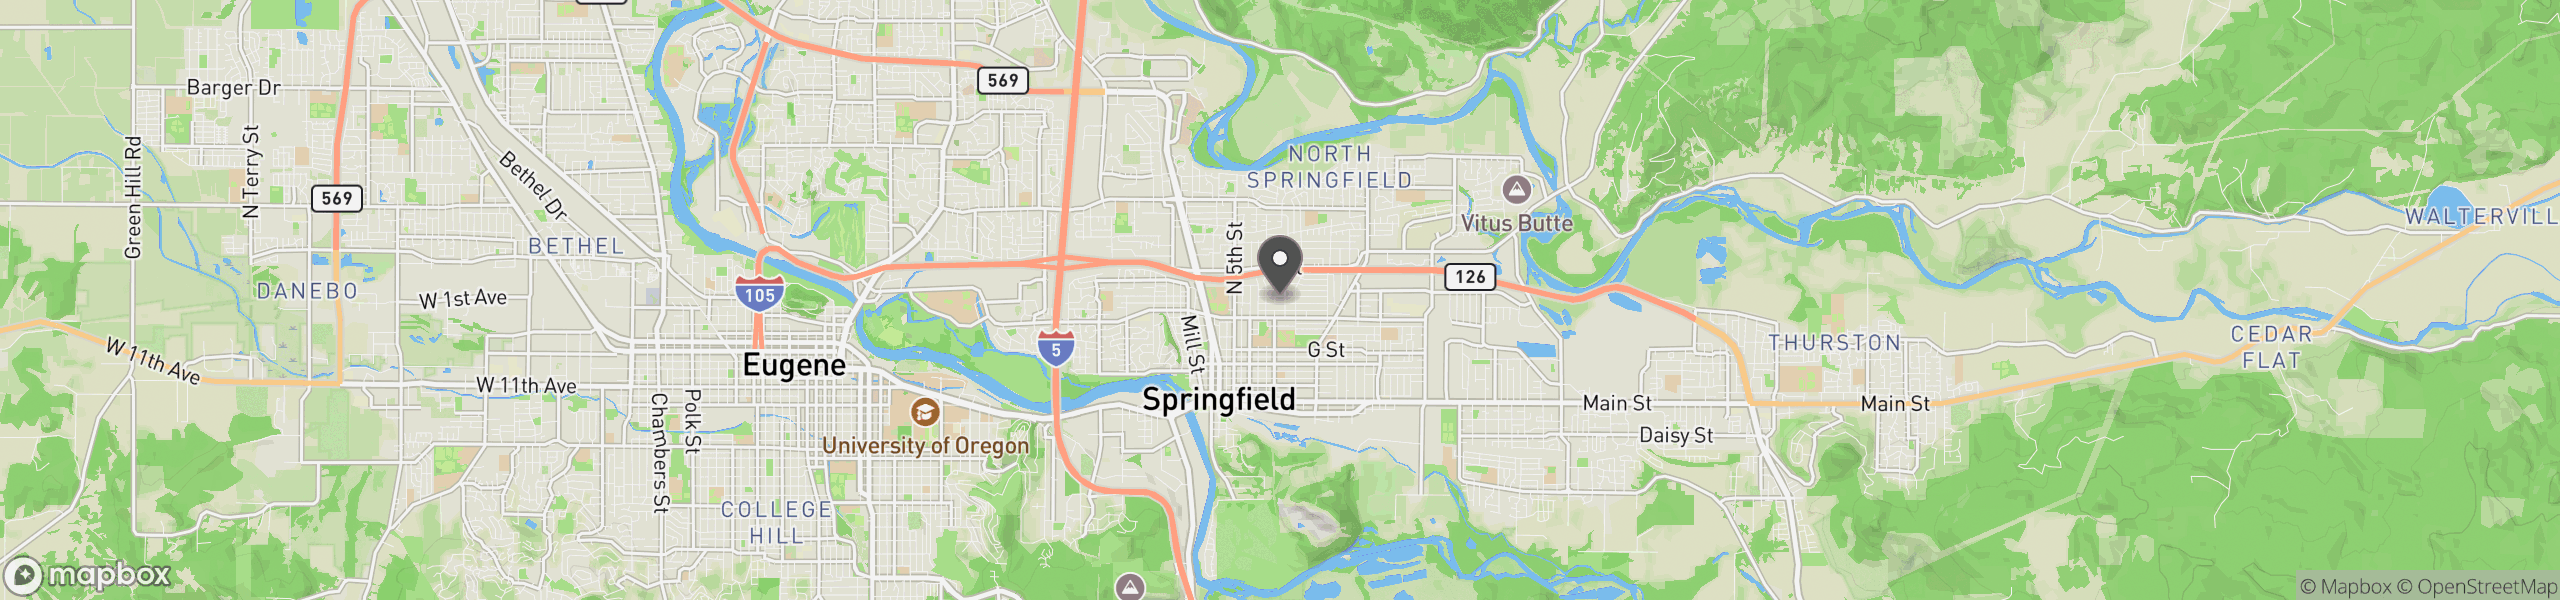 Springfield, OR 97477